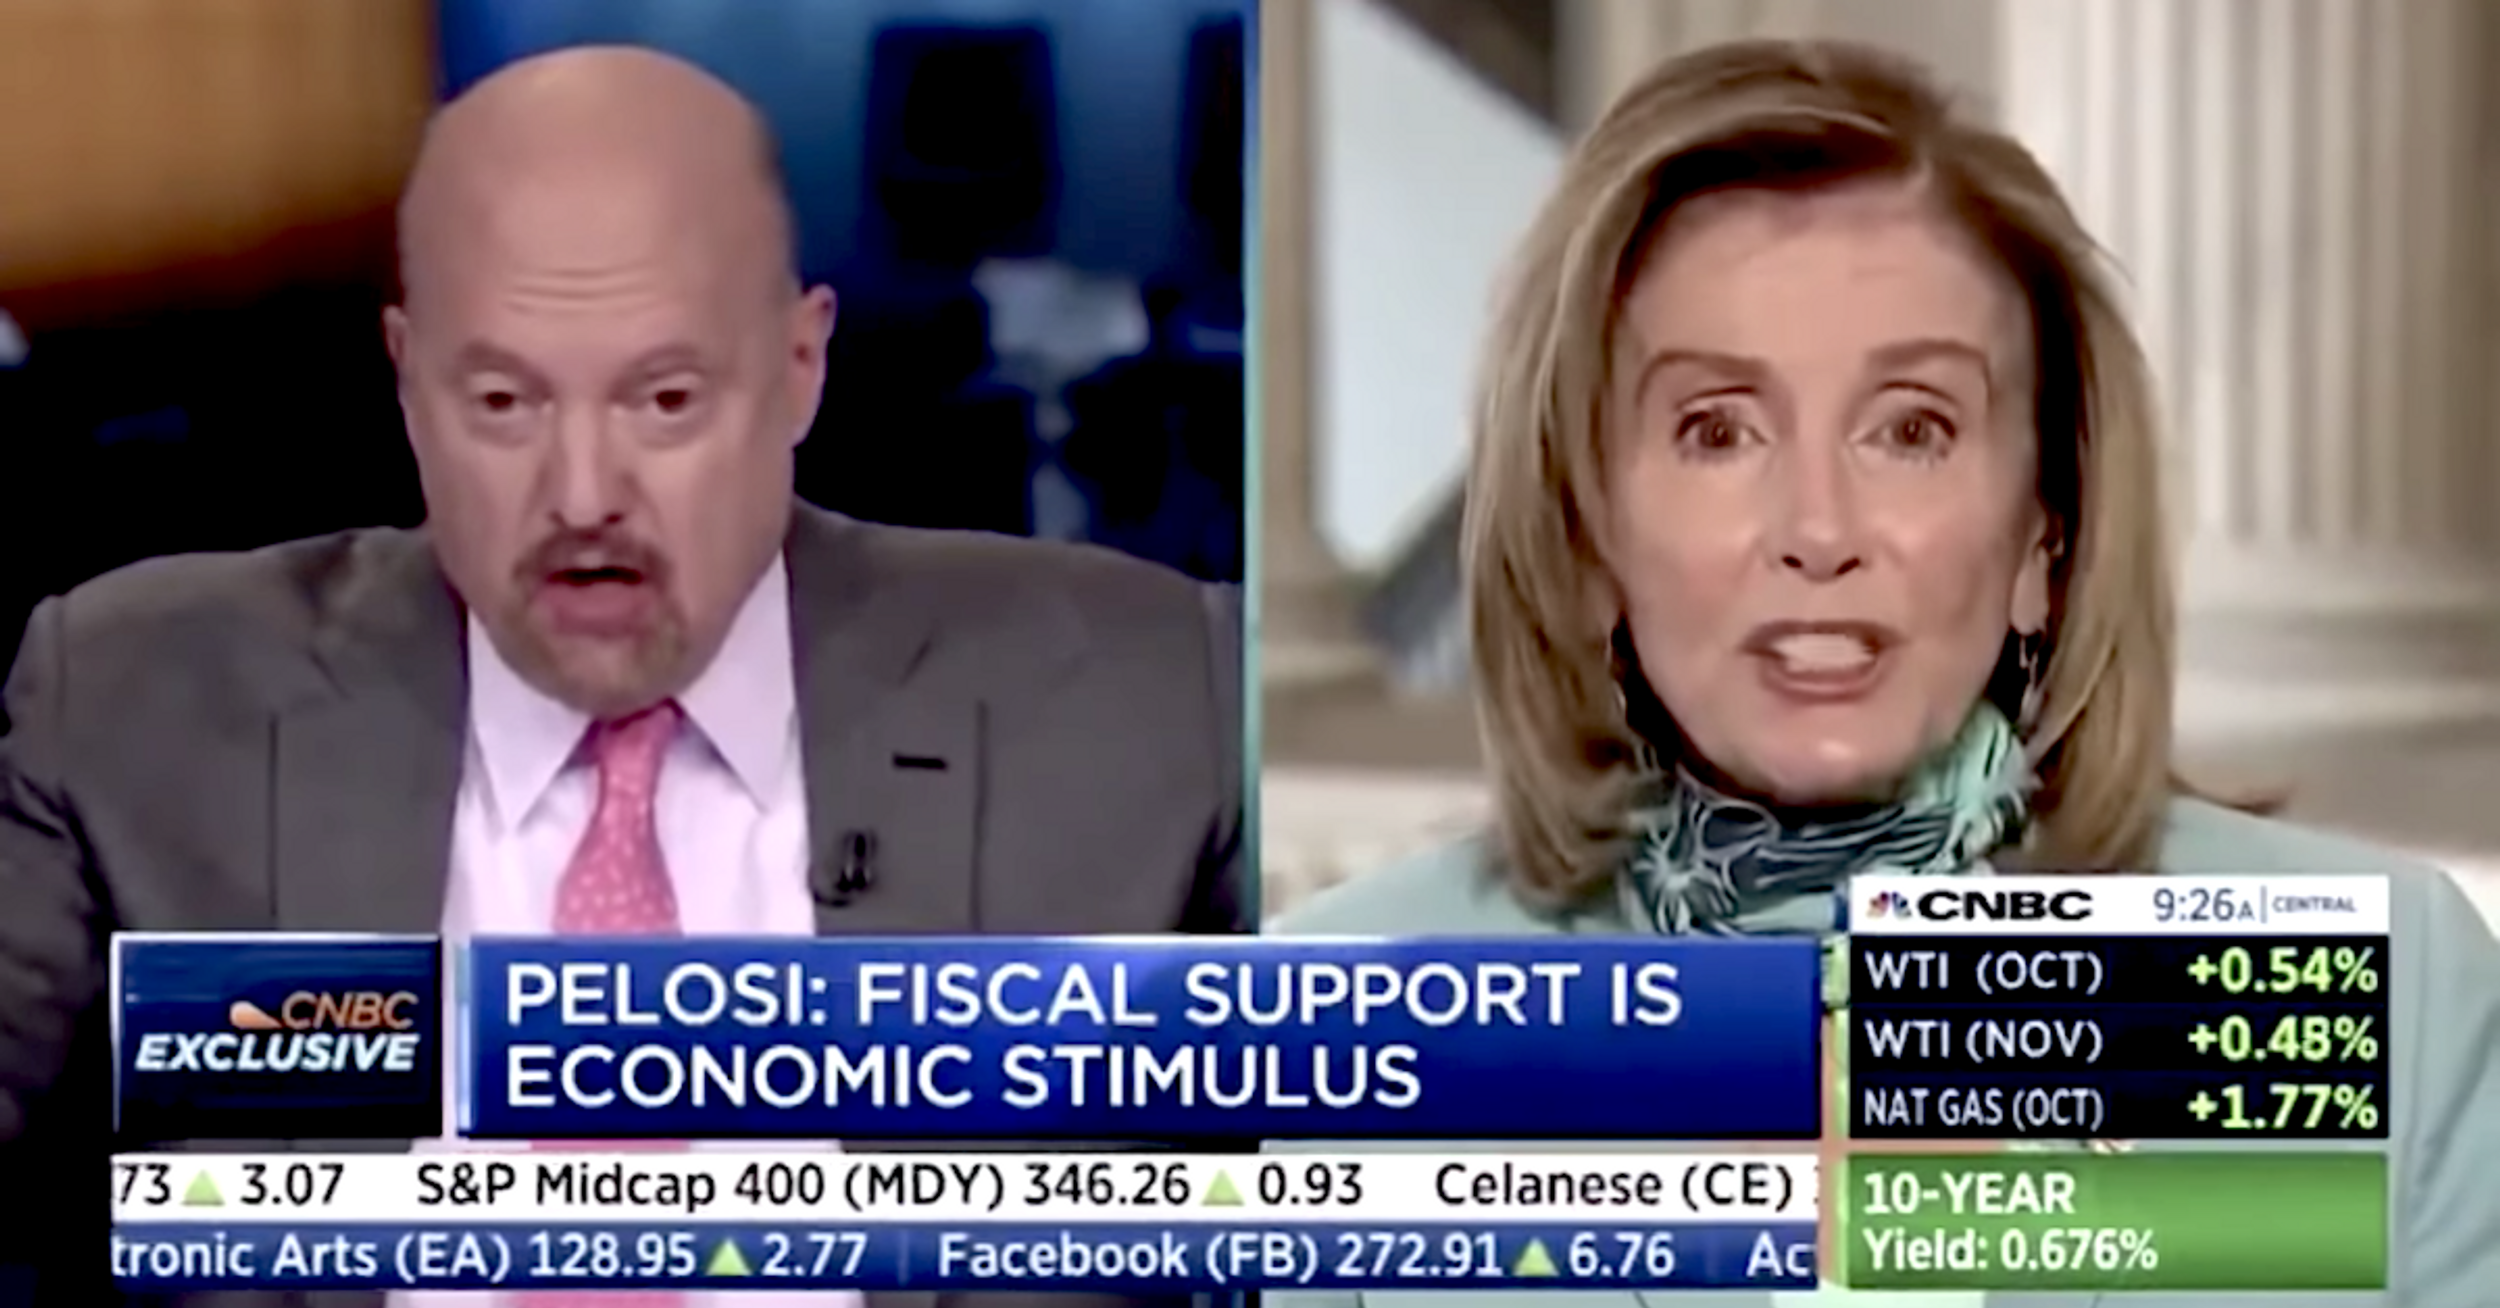 Jim Cramer Just Called Speaker Pelosi 'Crazy Nancy' to Her Face on Air and Tried to Blame Trump for It